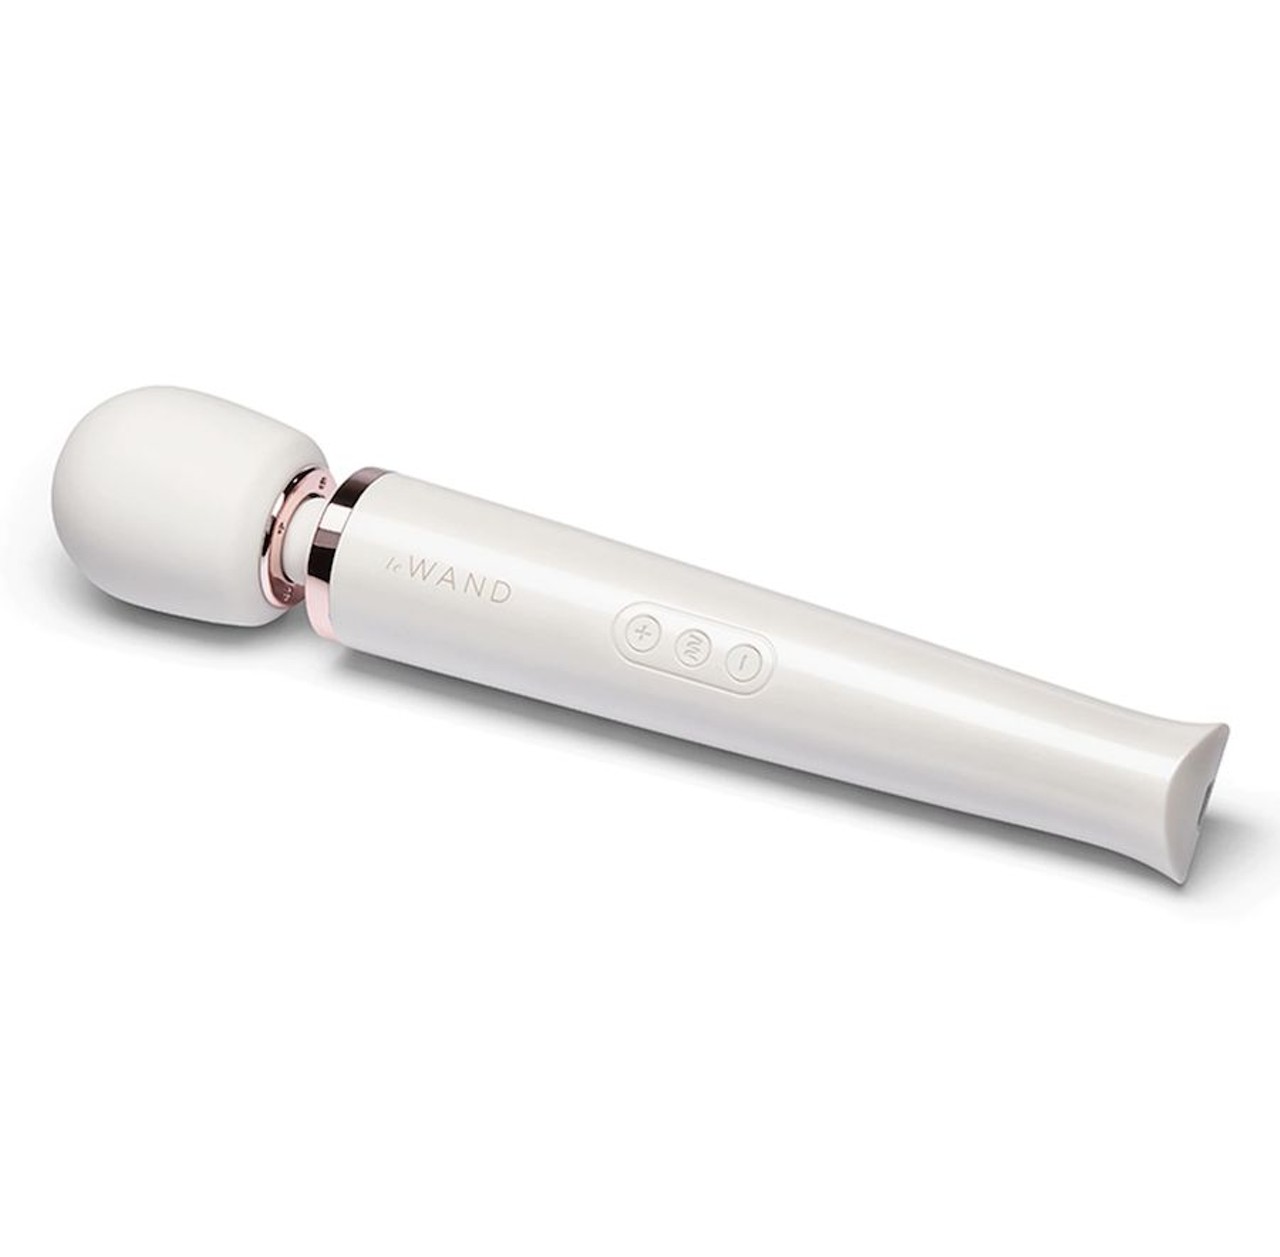 For those who want a powerful massager (wink, wink)
Le Wand Rechargeable 10-Speed Wand Massager, $136
Cirilla's, various locations; cirillas.com
There's a reason wand massagers are among some of the best selling vibes on the market. Maybe you recall stumbling upon this massager in your parents&#146; bathroom cupboard and thinking, &#147;Well, my mom does complain about having a sore neck a lot,&#148; only to, many years later, realize that wands hold a magic that no wizard can possibly possess. This particular wand, the Le Wand Rechargeable variety, offers 10 distinctive, very rumbly vibration speeds up to 6,000 RPM and 20 patterns. If you haven't guessed by now, the wand is the clitoris&#146;s best friend, one that will never let you down or stand you up. After all, you can't recharge a best friend, now can you? 
Photo via cirillas.com
